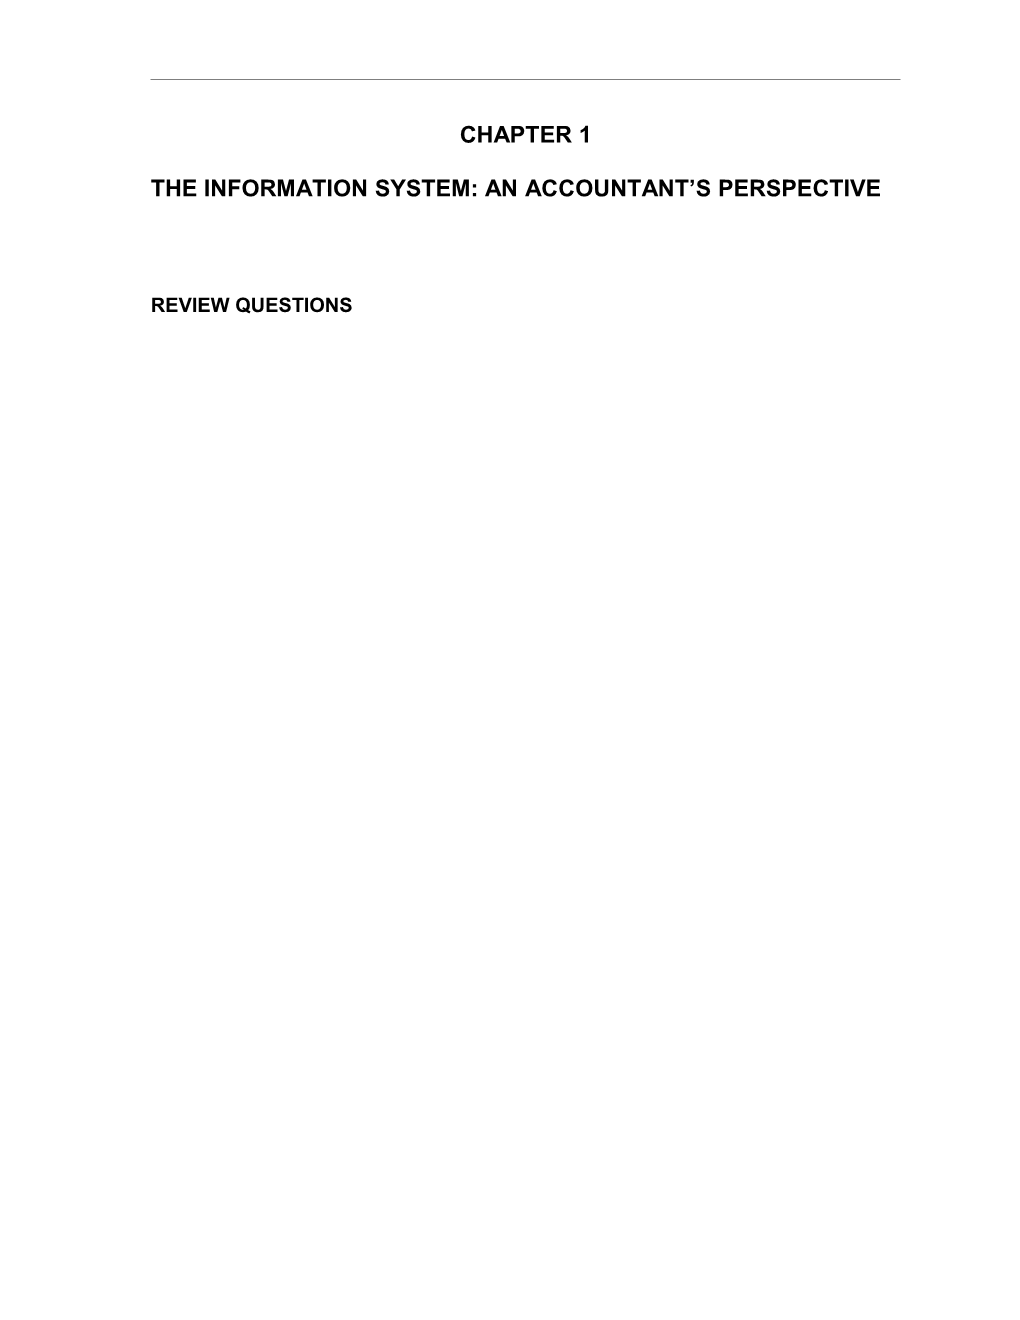 The Information System: an Accountant S Perspective